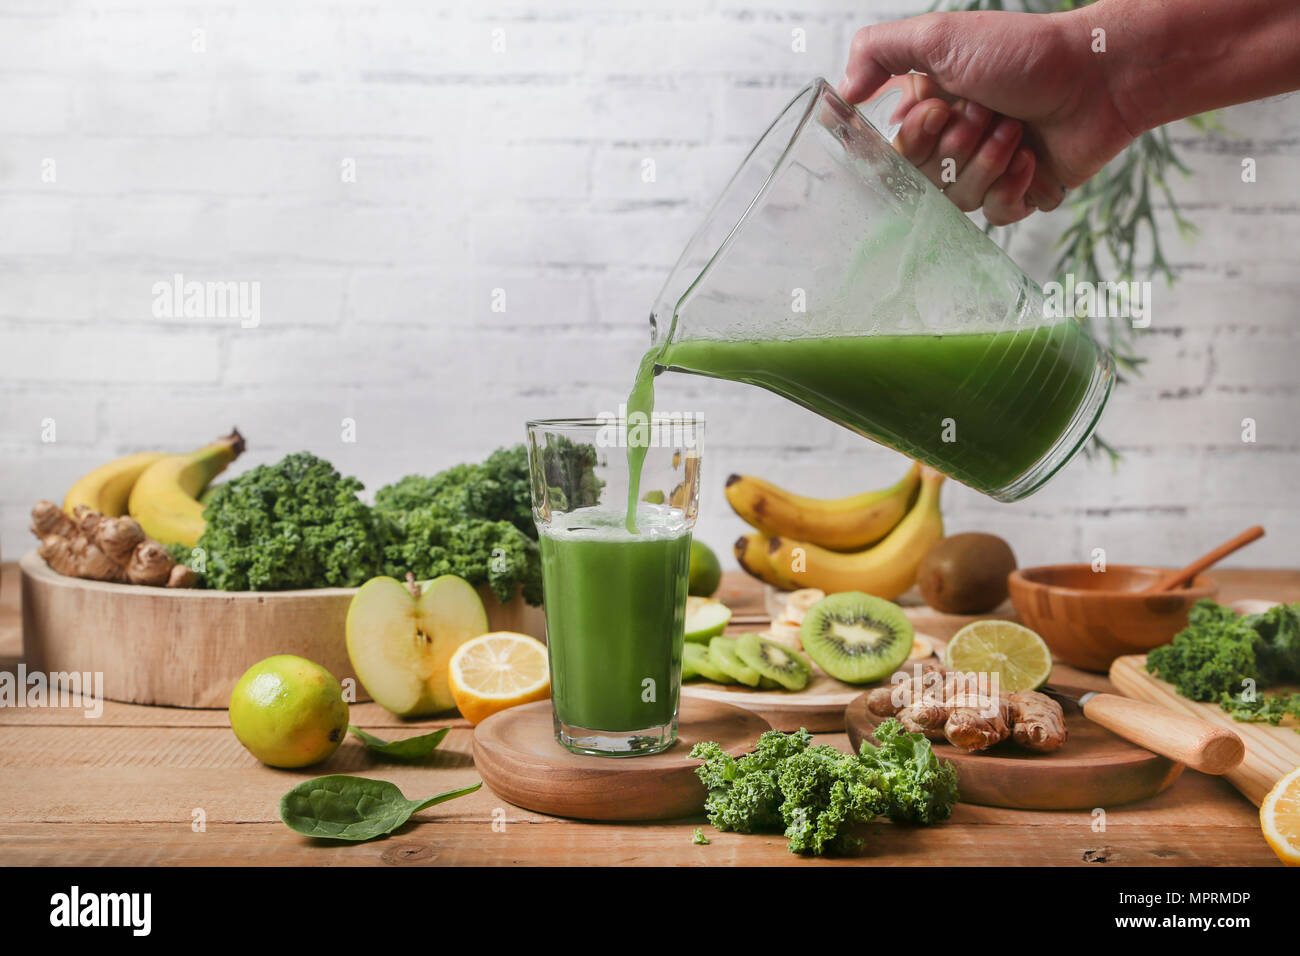 Man serving glass of green smoothie surrounded by ingredients Stock Photo